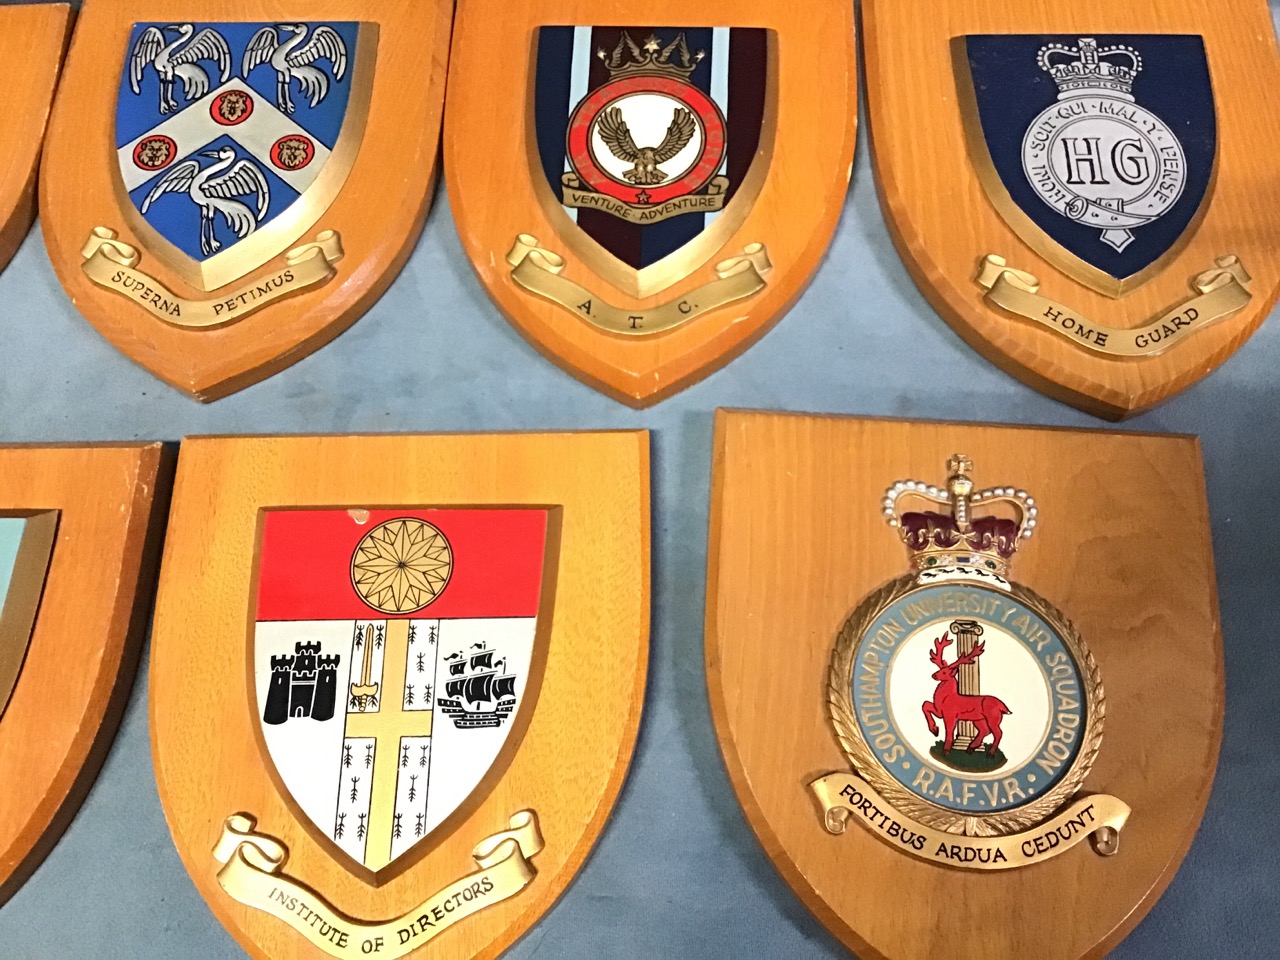 Miscellaneous military and civil armorial shields - Home Guard, RAF College Cranwell, Air Training - Image 2 of 3